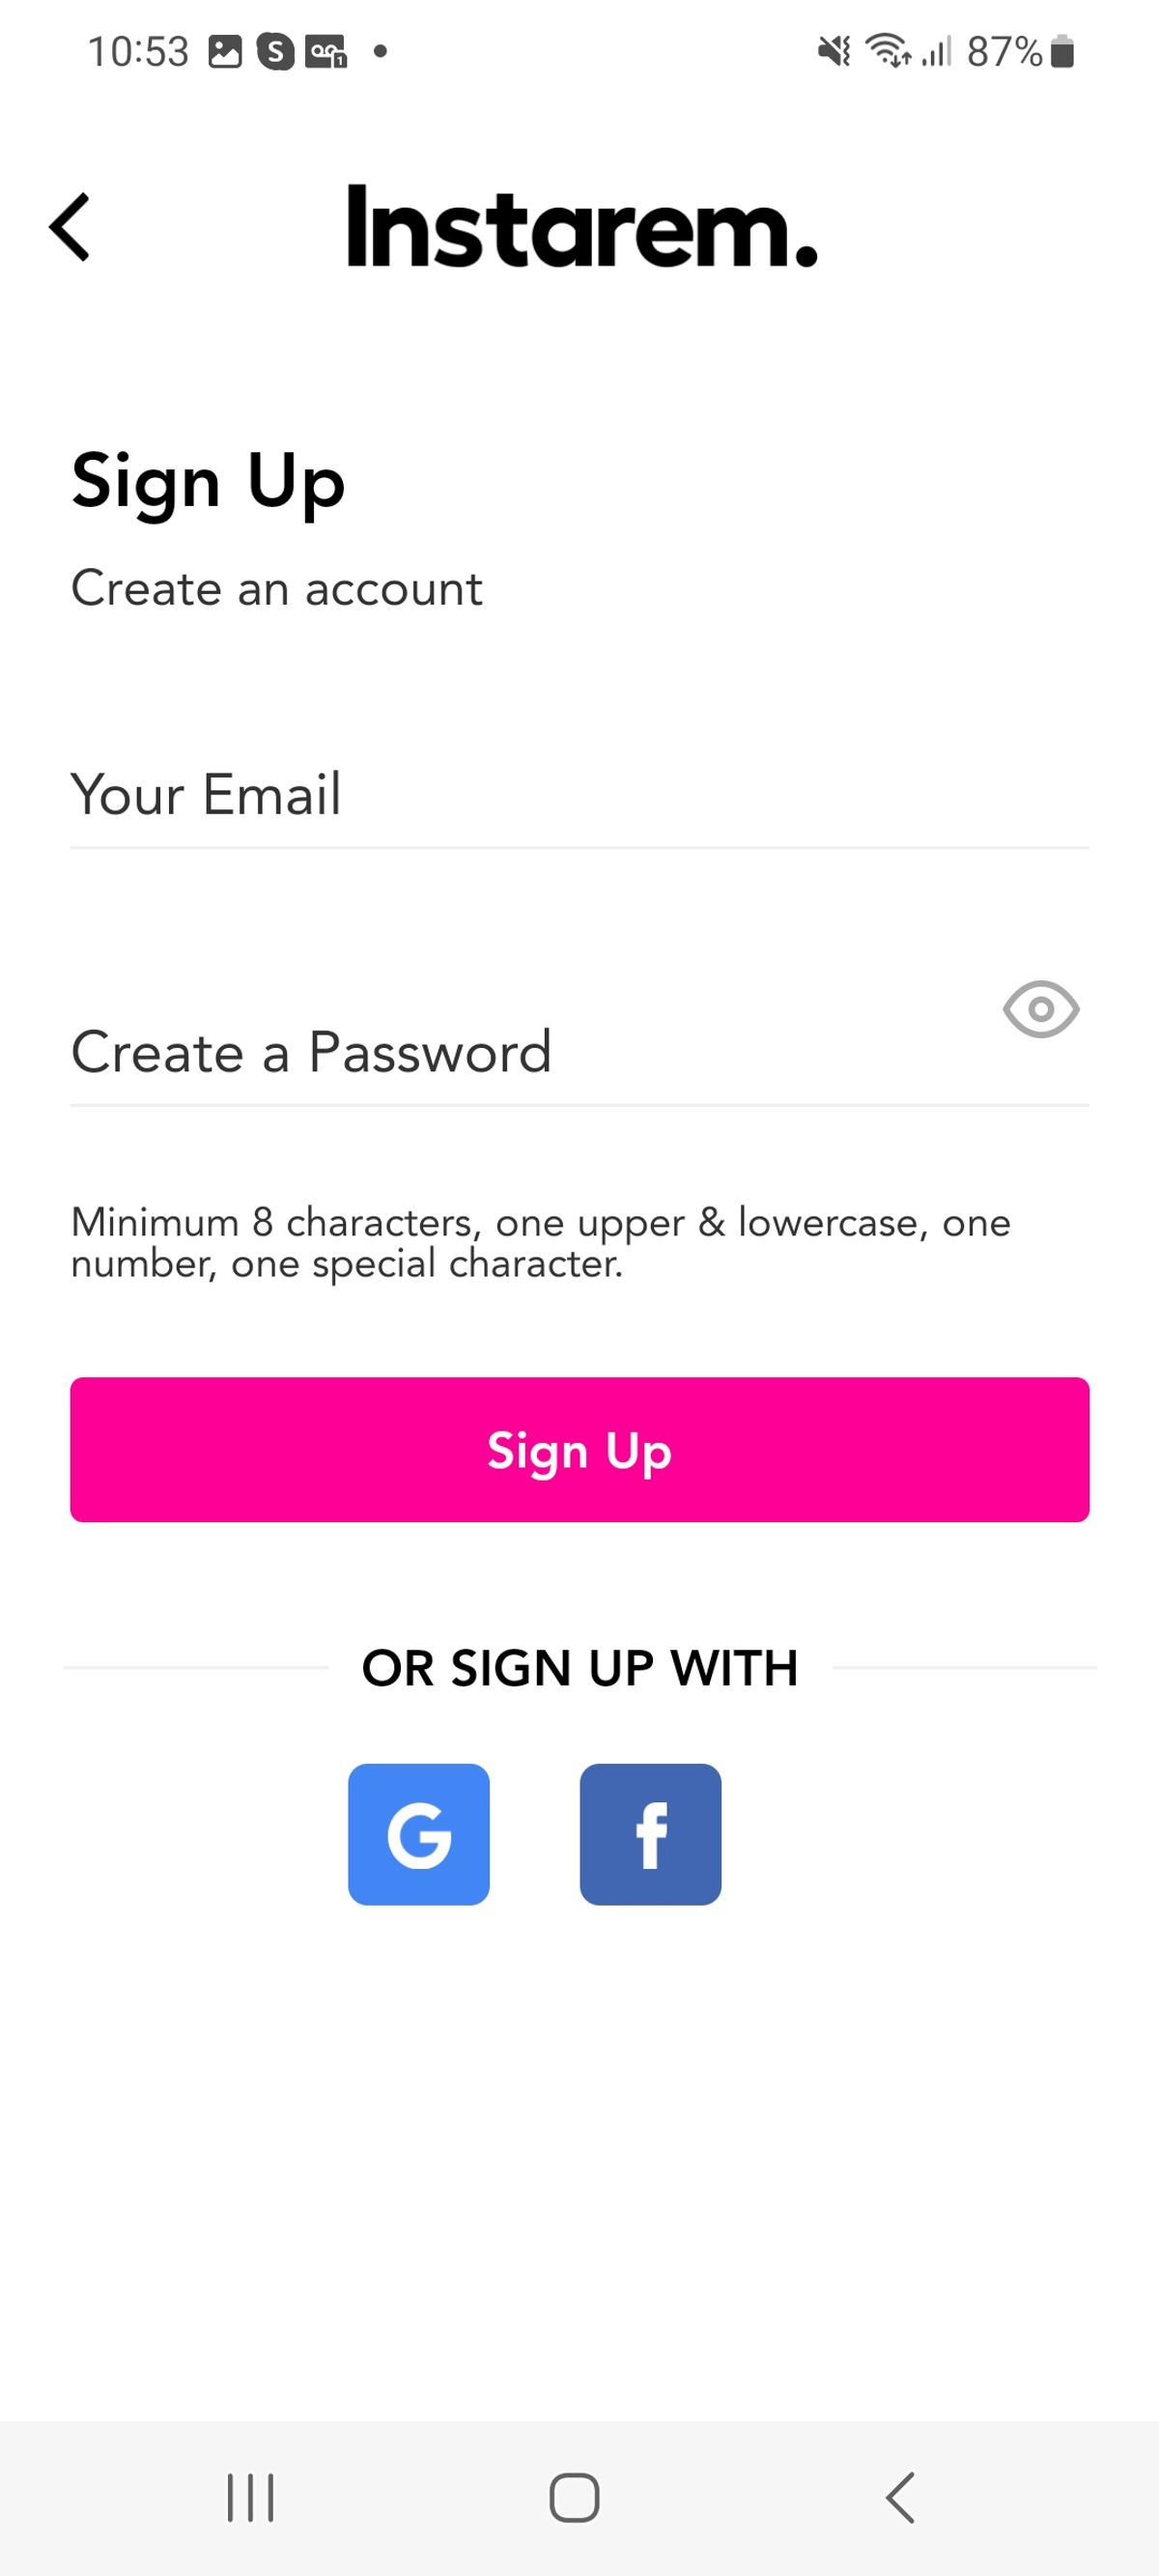 Email and password